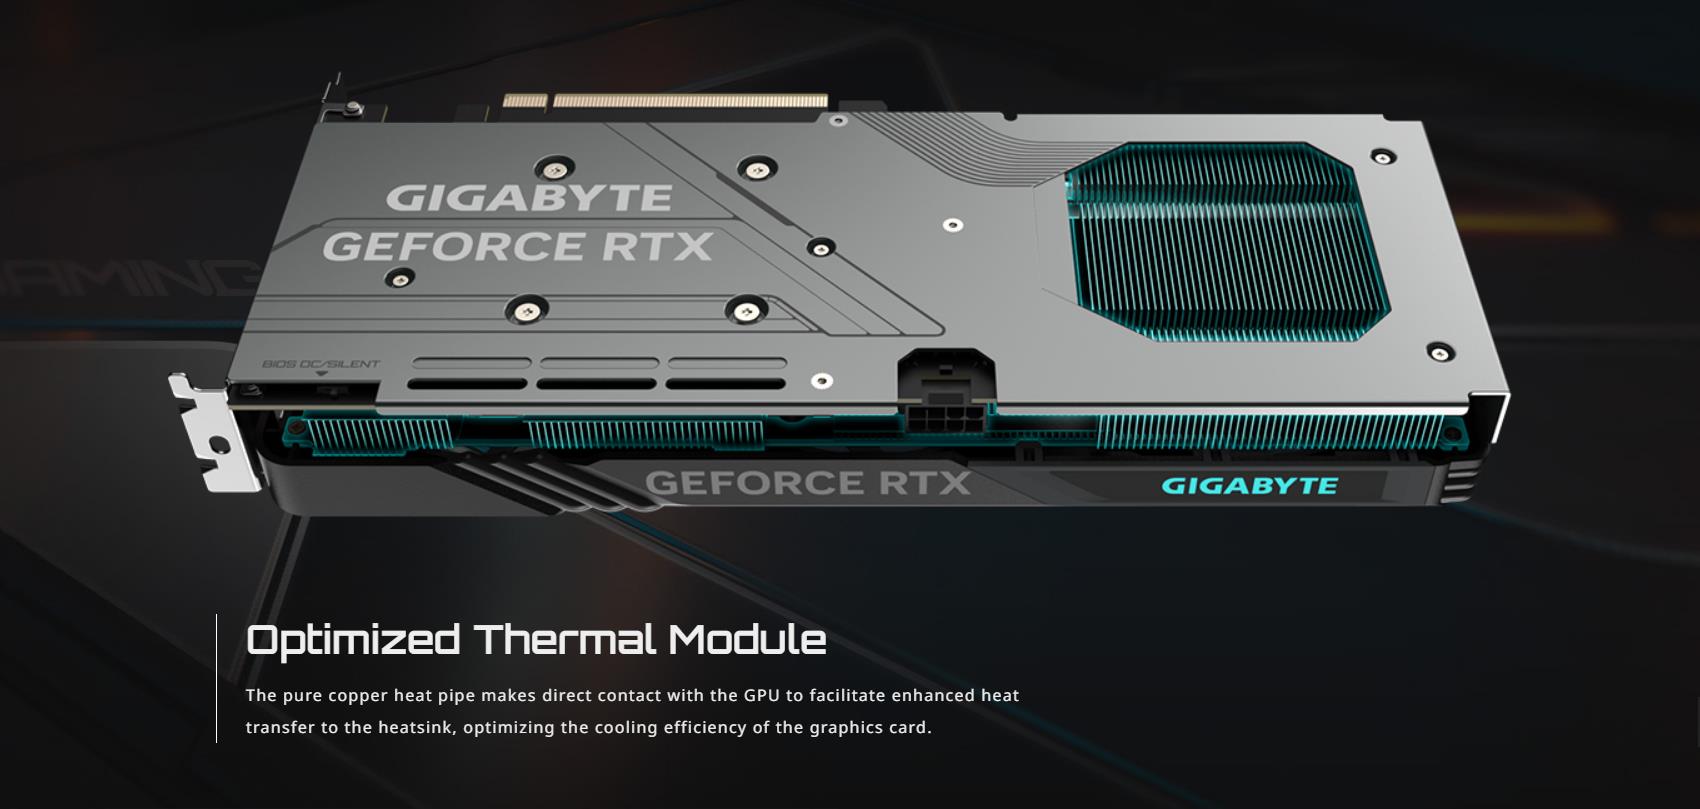 A large marketing image providing additional information about the product Gigabyte GeForce RTX 4060 Gaming OC 8GB GDDR6 - Additional alt info not provided